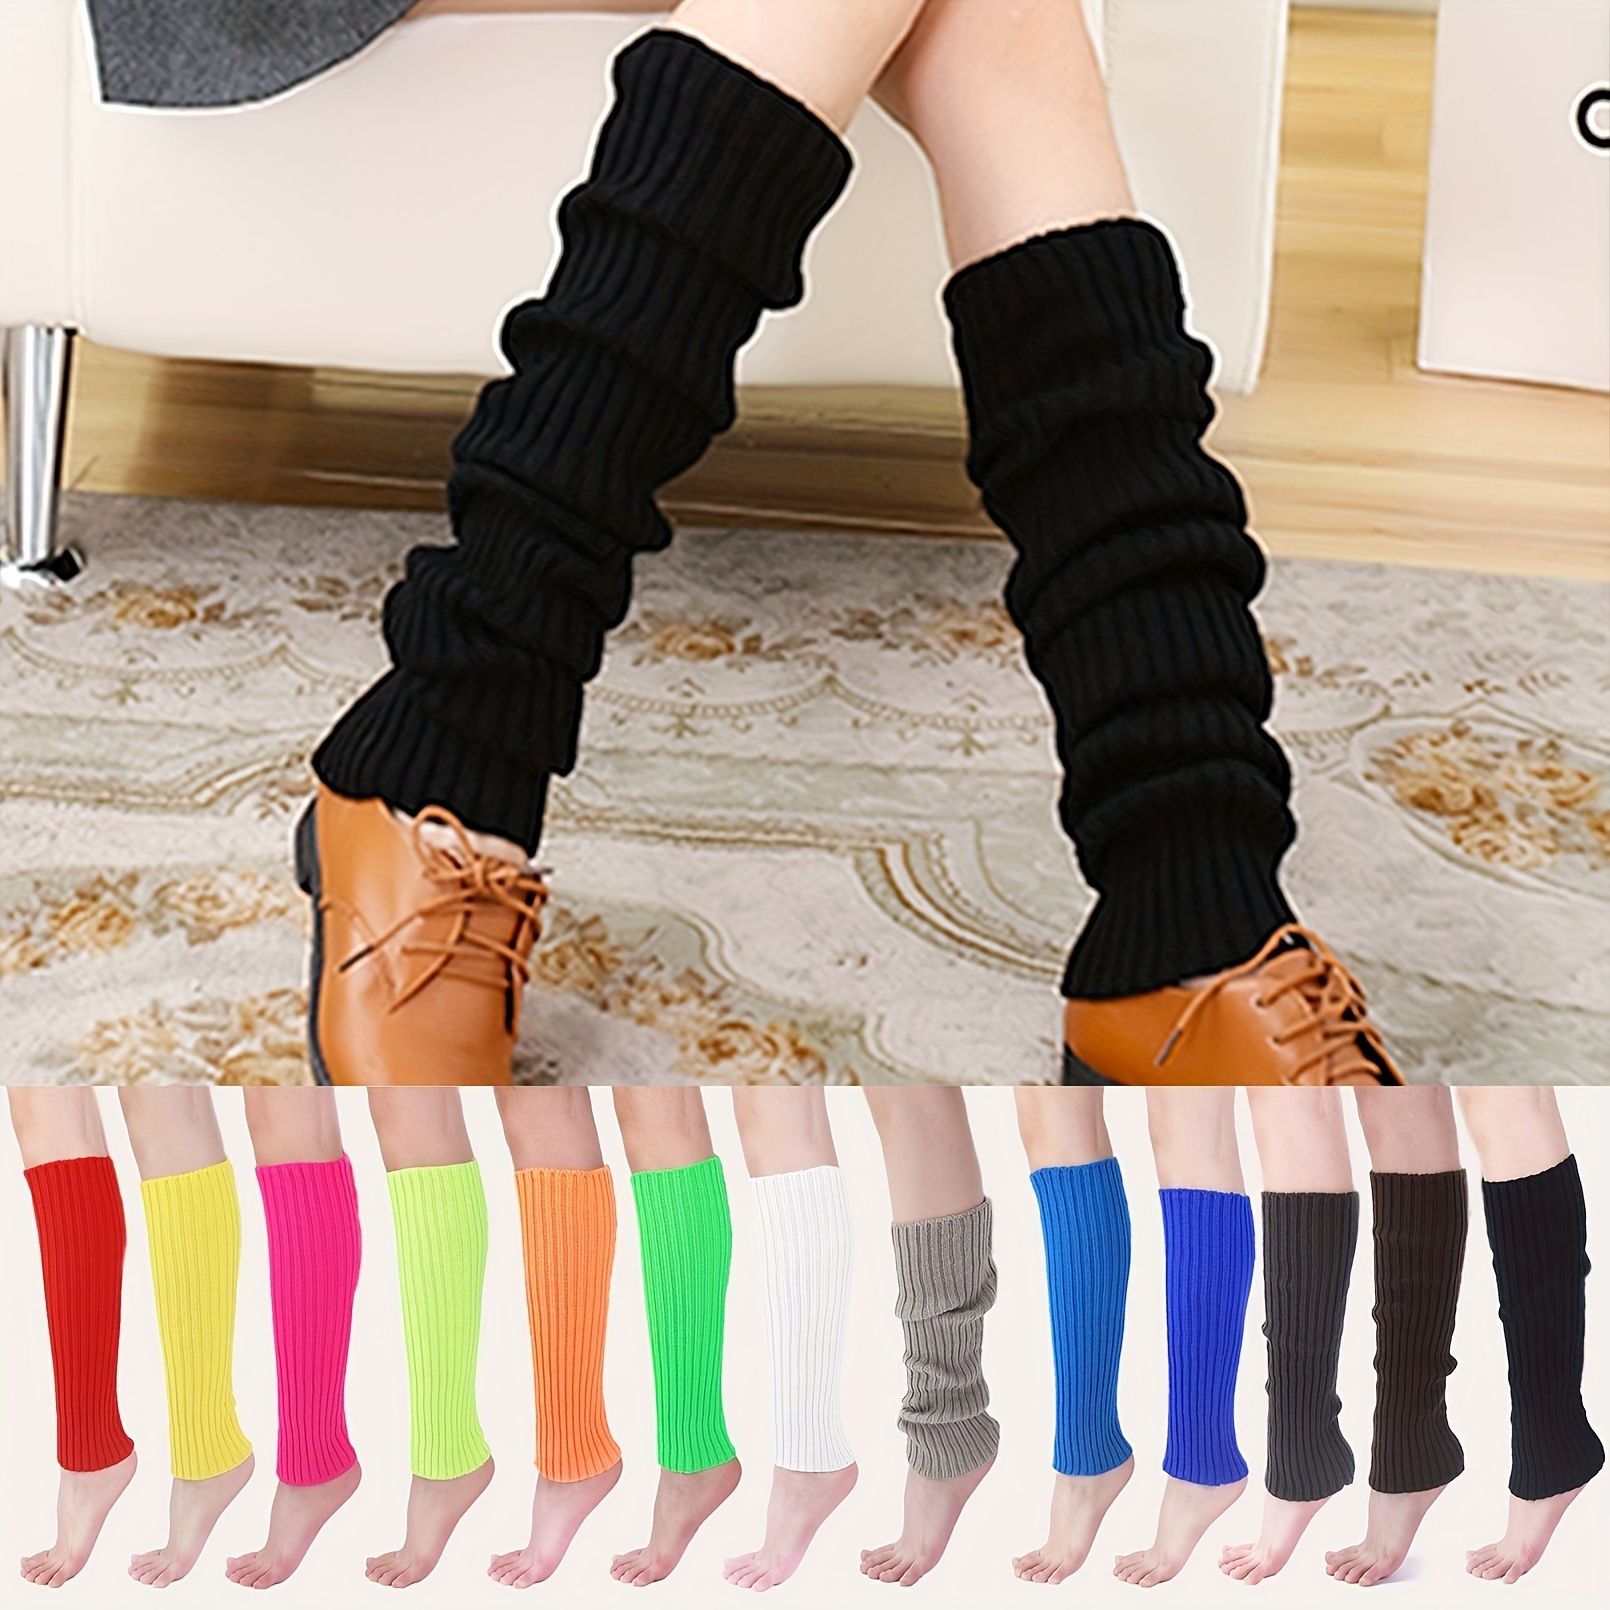 2 Pairs Leg Warmers For Women, Leg Warmers 80s Ribbed Knitted Long Socks  For Party Sports